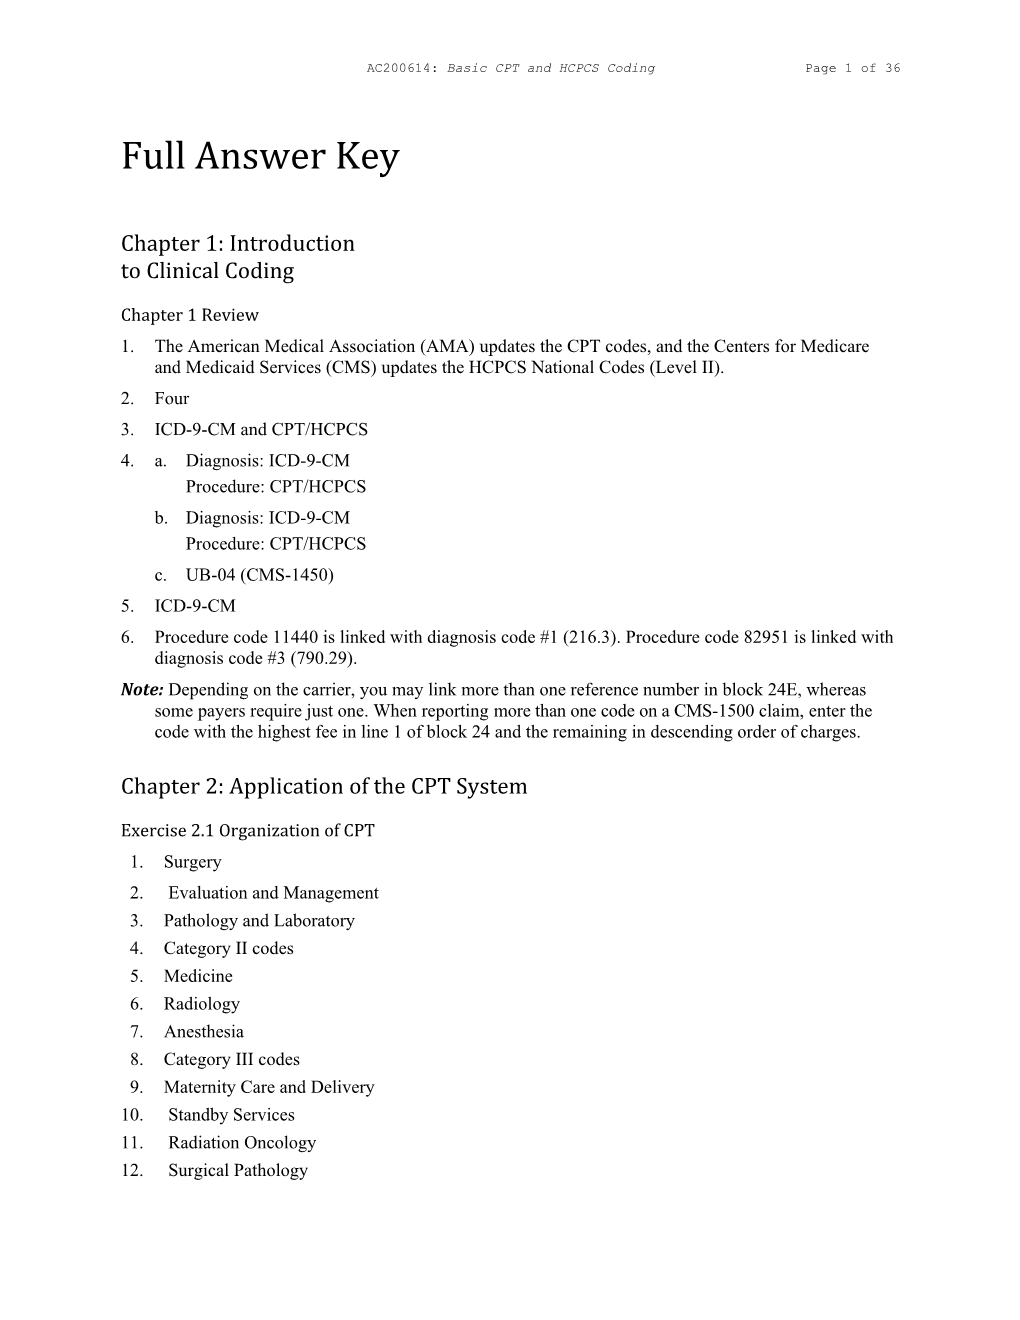 AC200614: Basic CPT and HCPCS Coding Page 1 of 35